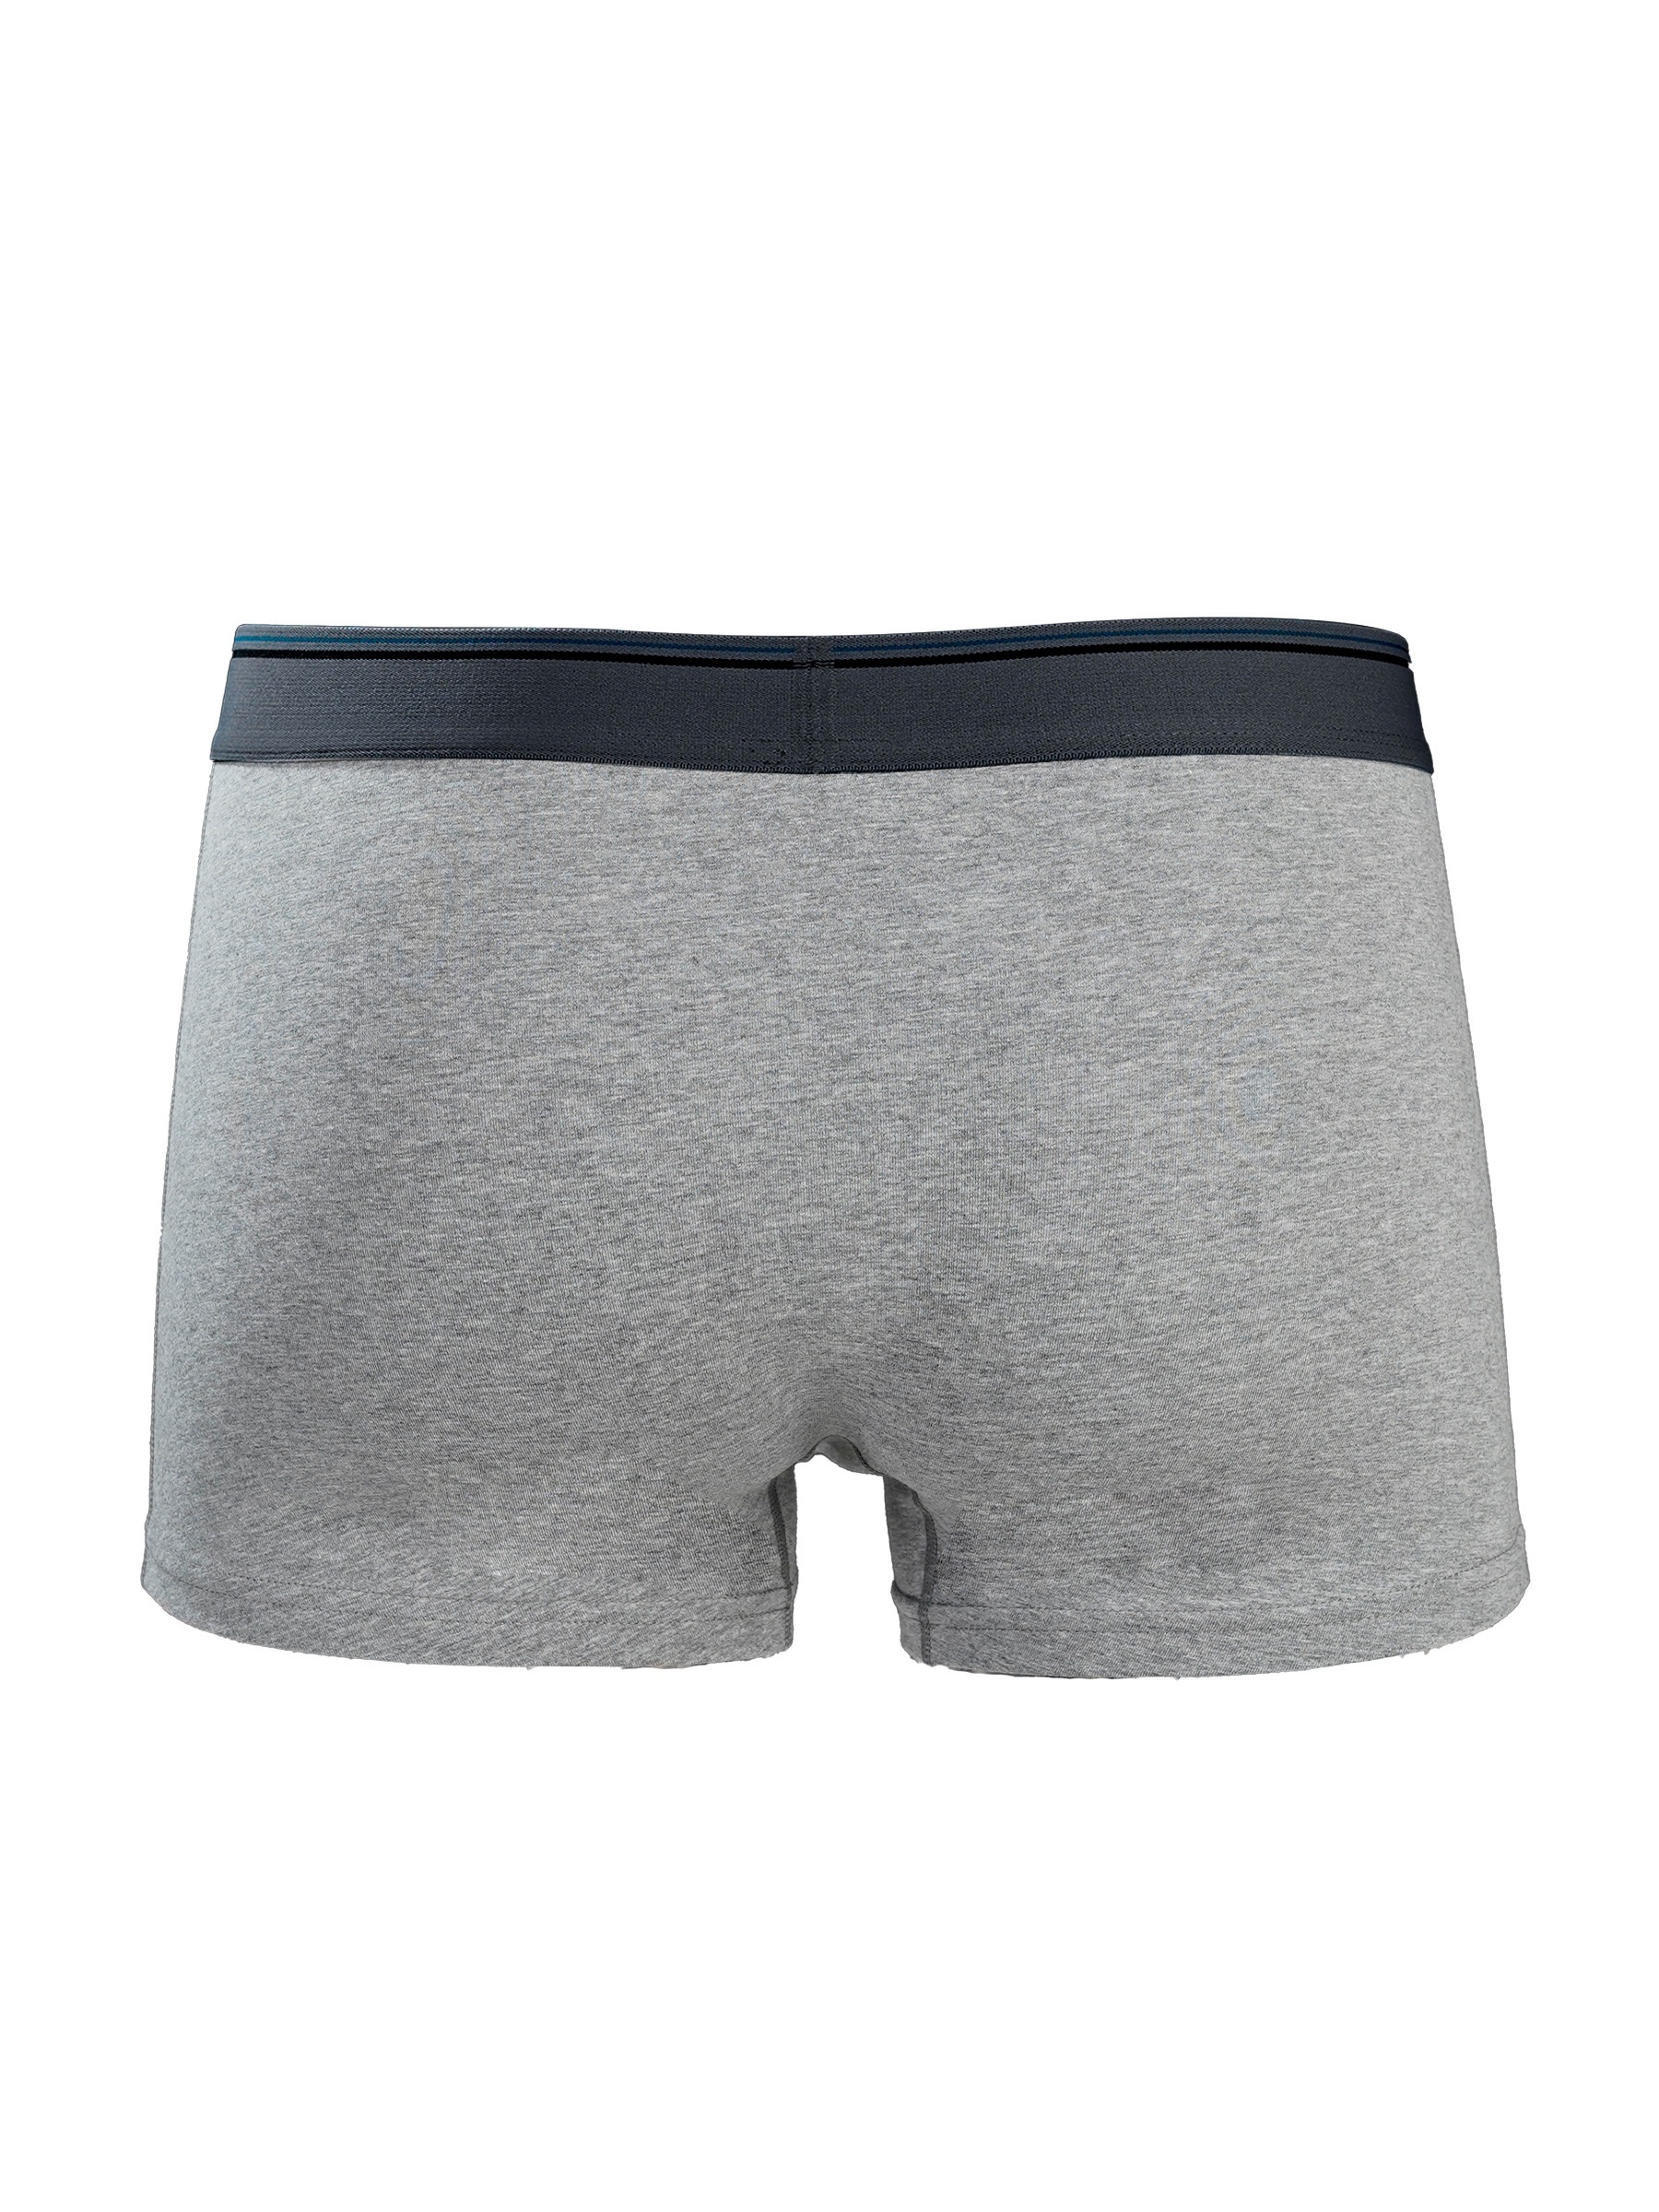 Washable Soft Comfortable Breathable Skin-friendly Plain V Shape Underwear  Boxers Style: Boxer Briefs at Best Price in Indore